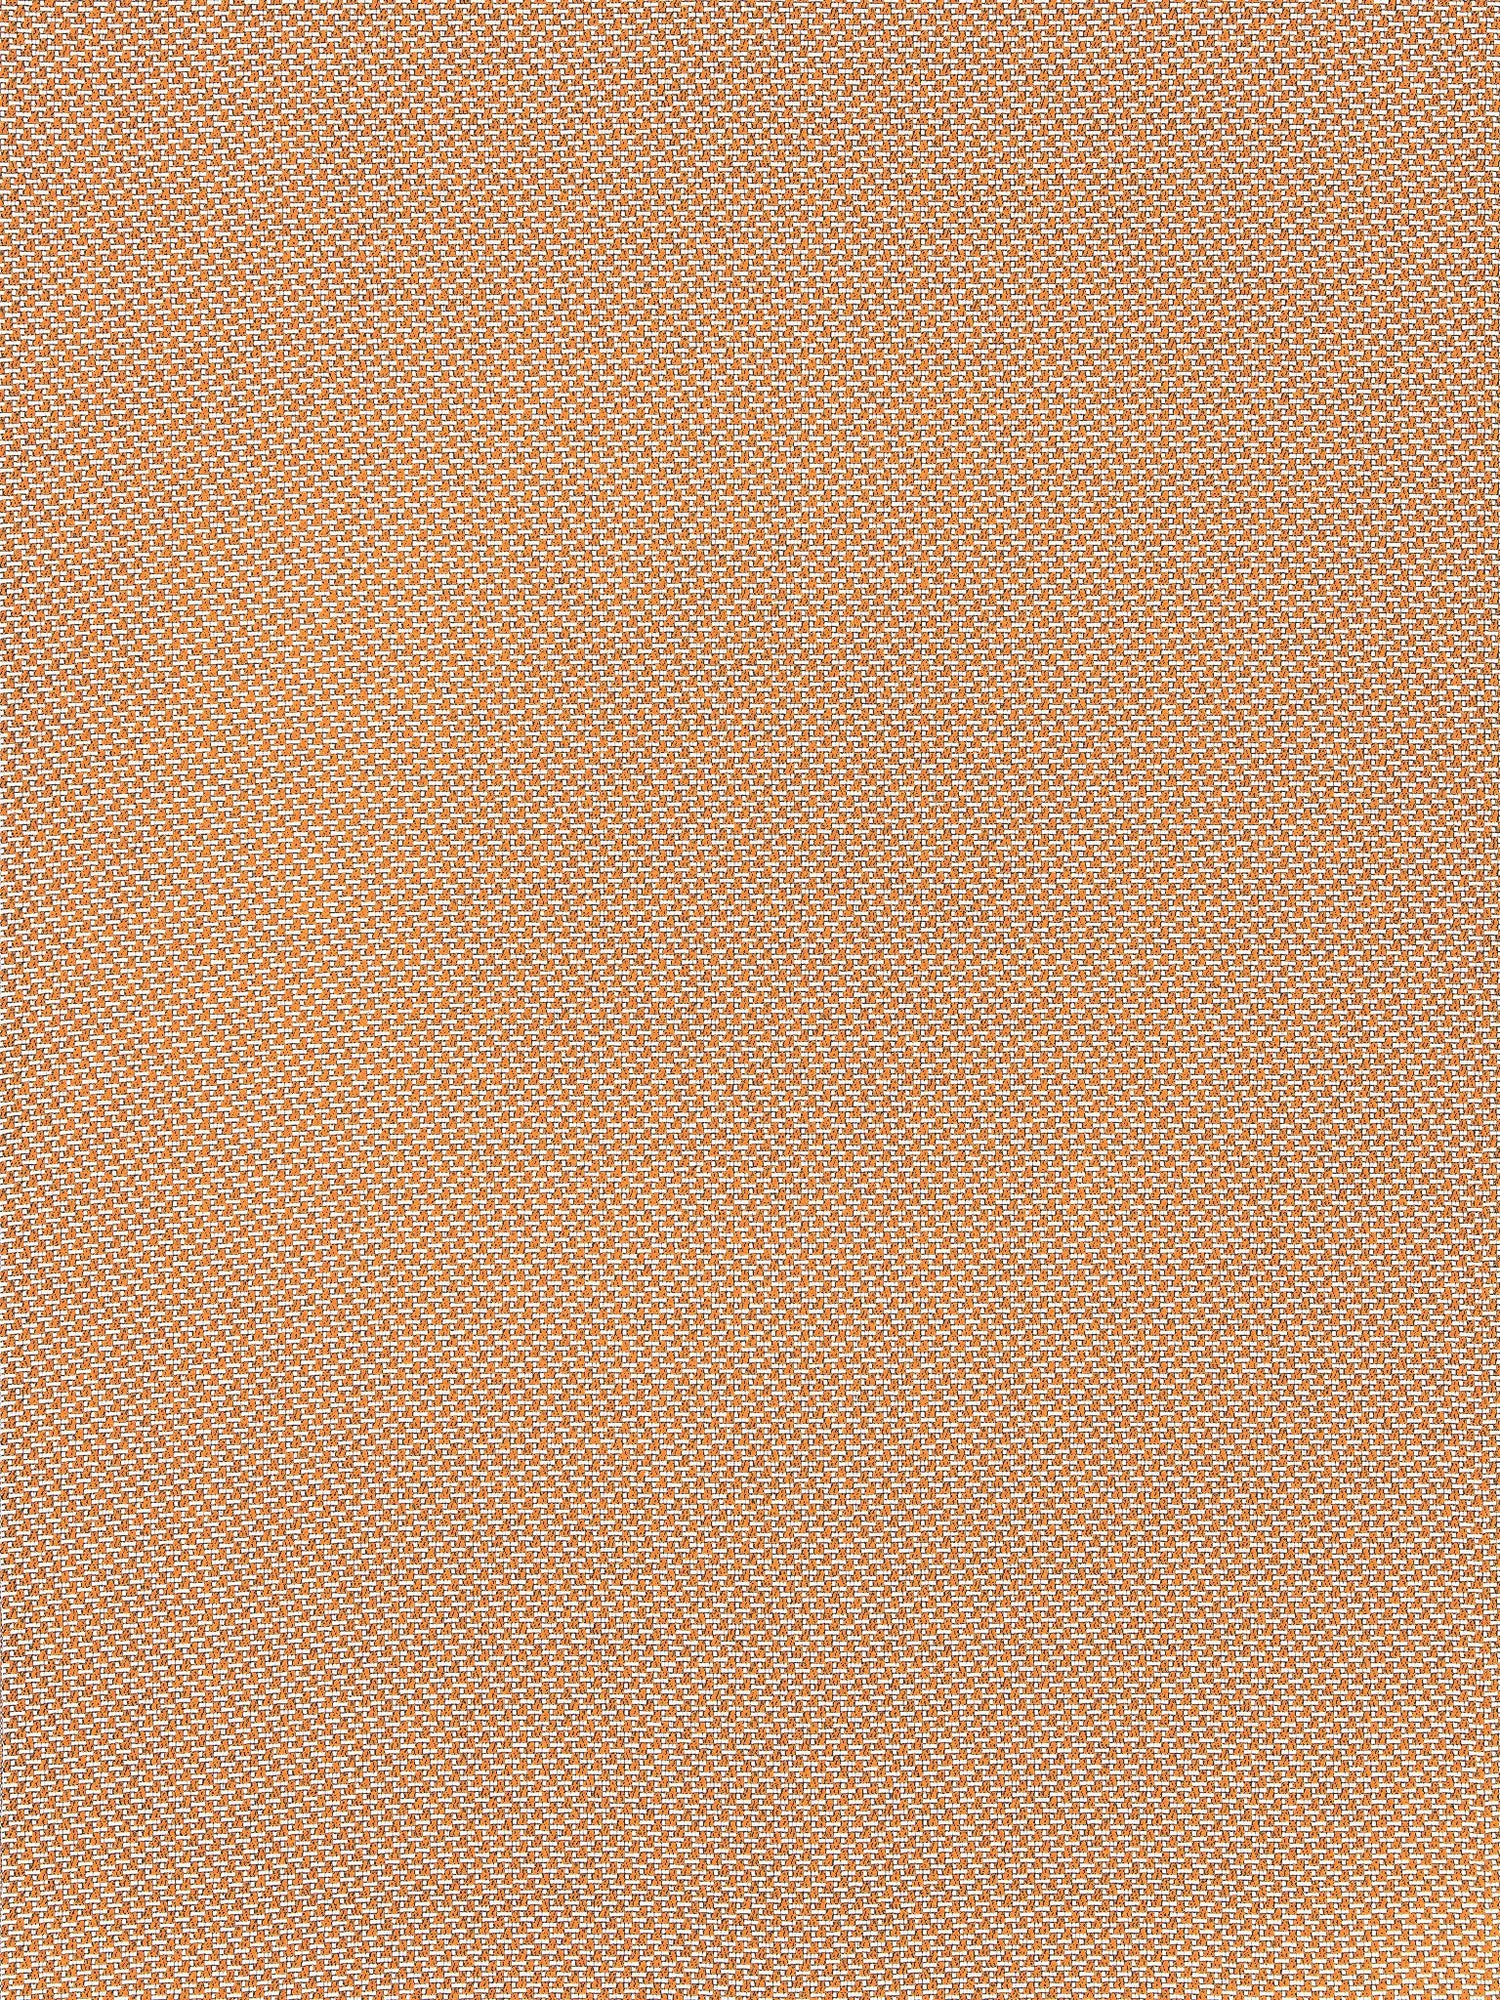 North Downs fabric in spiced peach color - pattern number EY 000213ND - by Scalamandre in the Old World Weavers collection